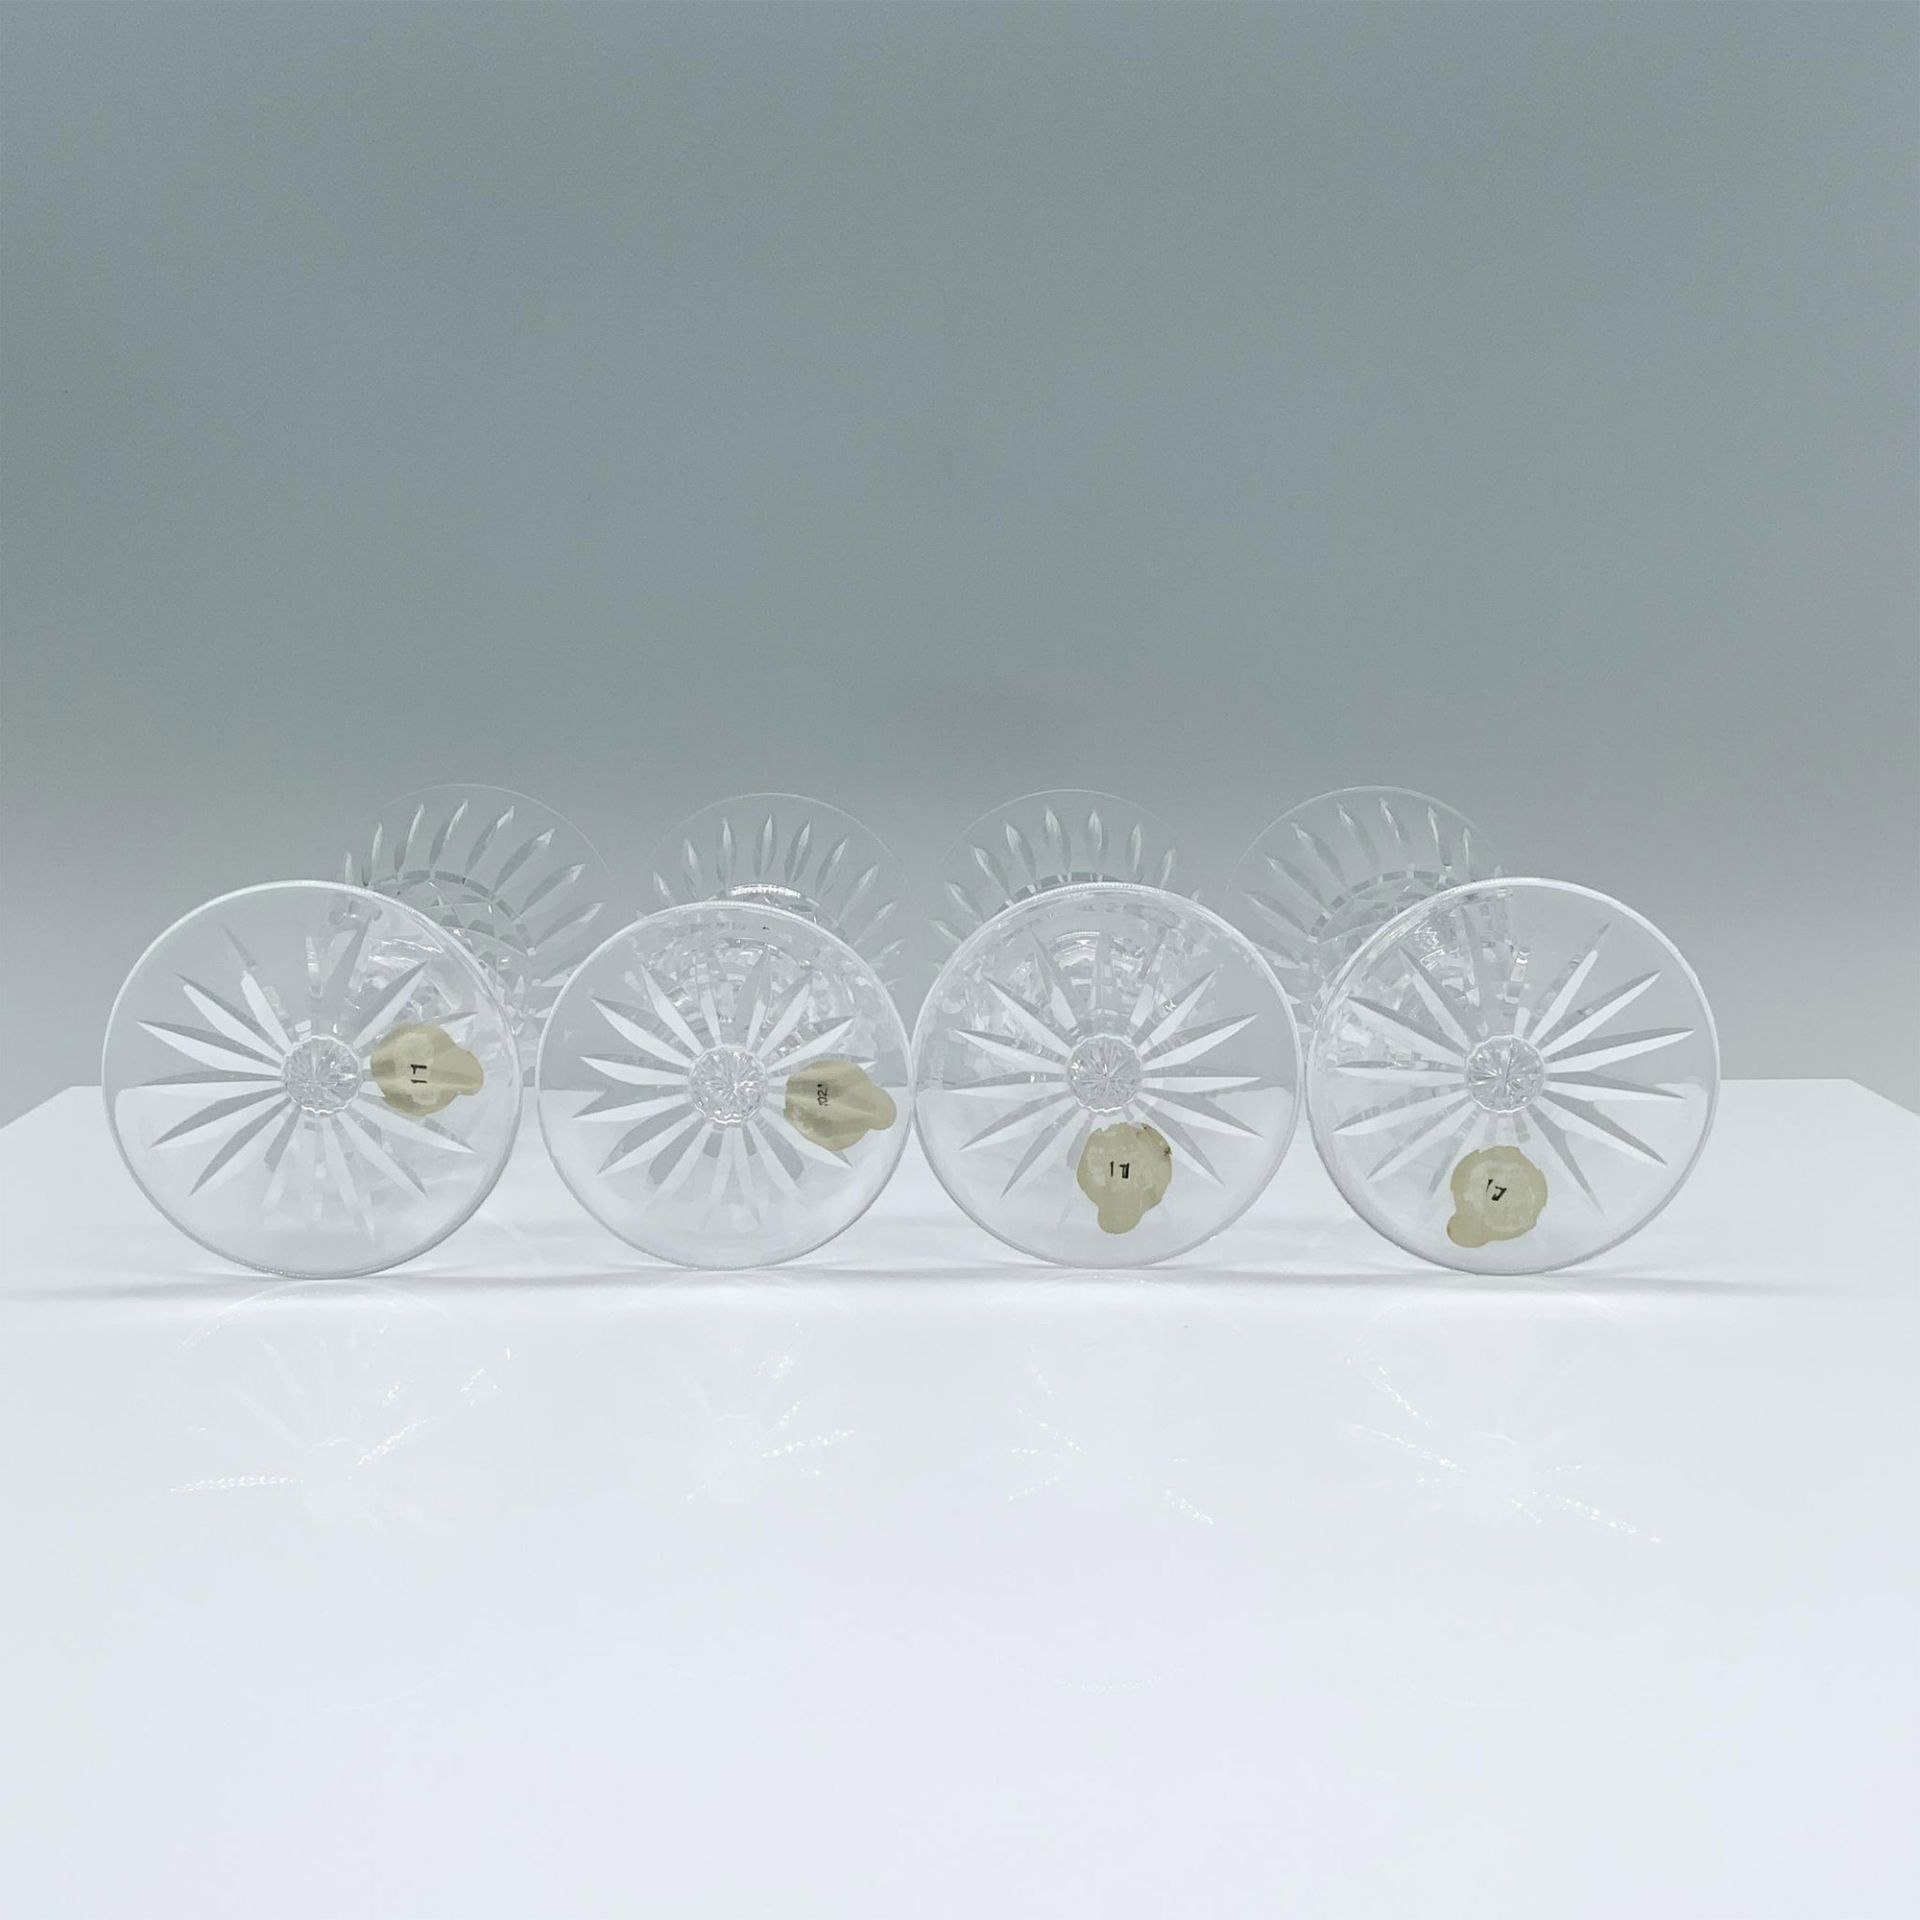 4pc Waterford Crystal Flute Champagne Glasses, Maeve - Image 3 of 4